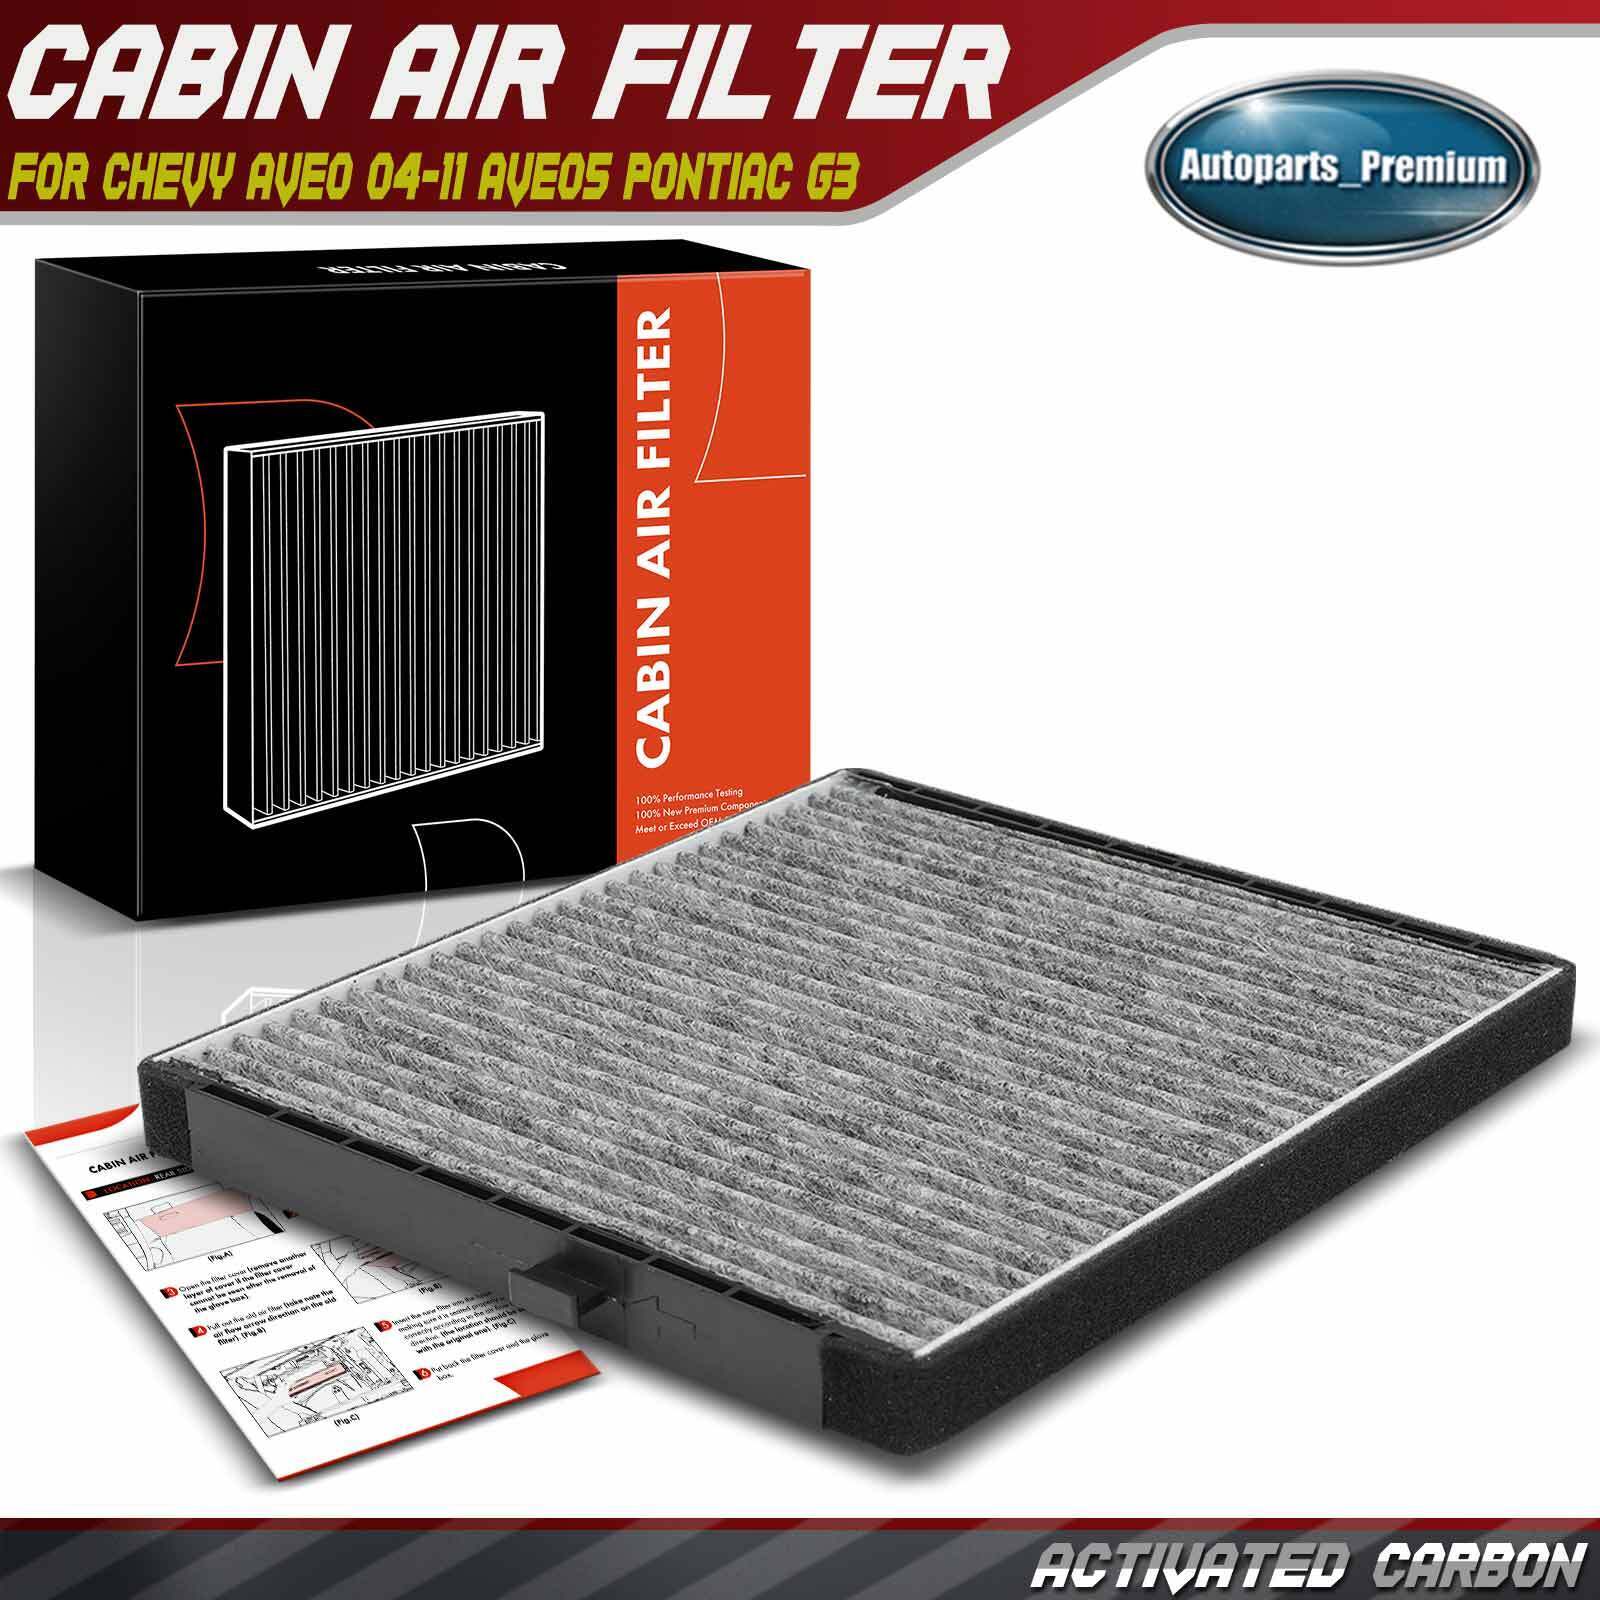 Activated Carbon Cabin Air Filter for Chevrolet Aveo 04-11 Aveo5 Pontiac G3 Wave